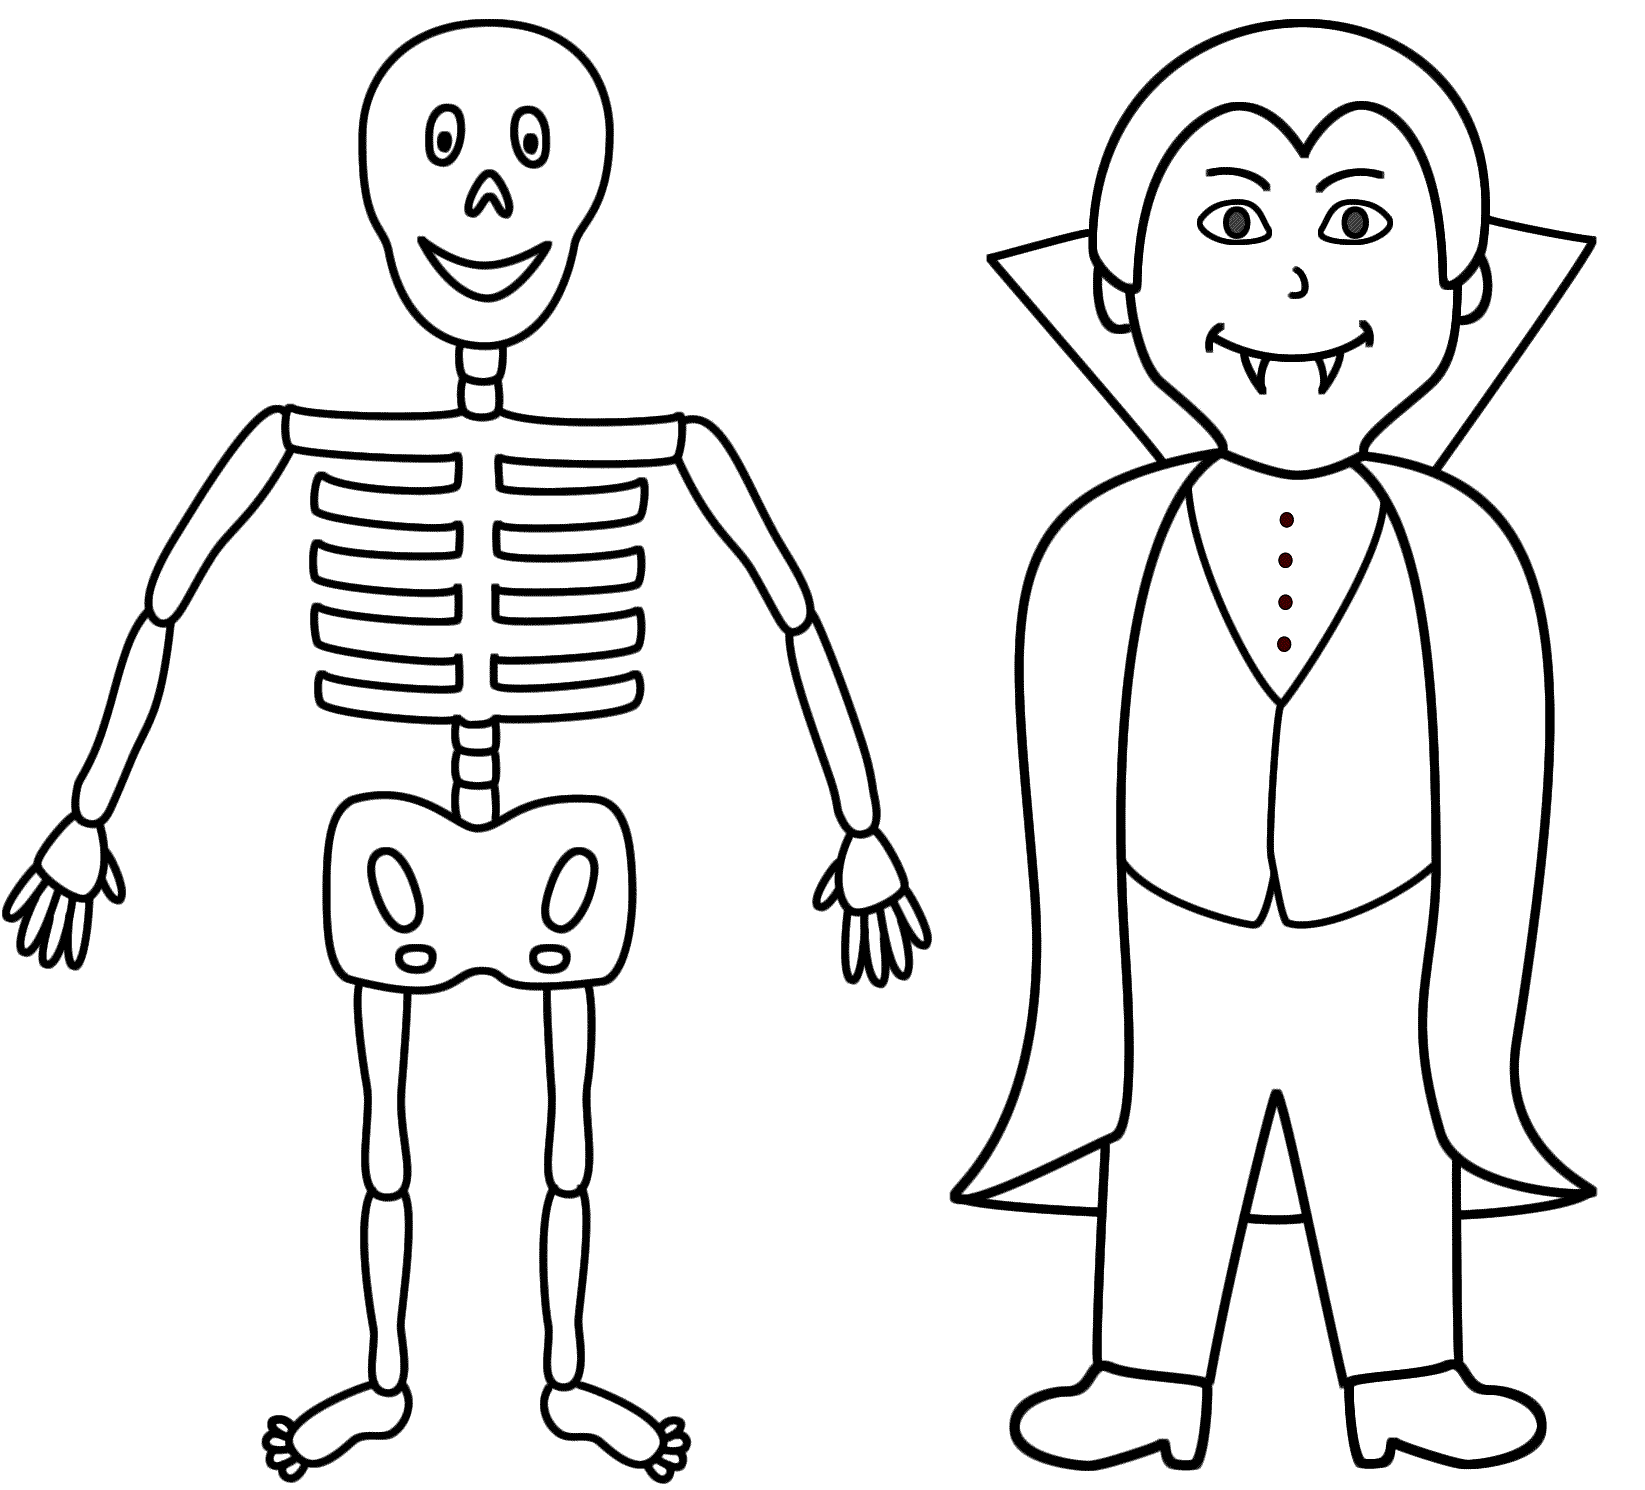 Skeleton with a vampire - Coloring Page (Halloween)